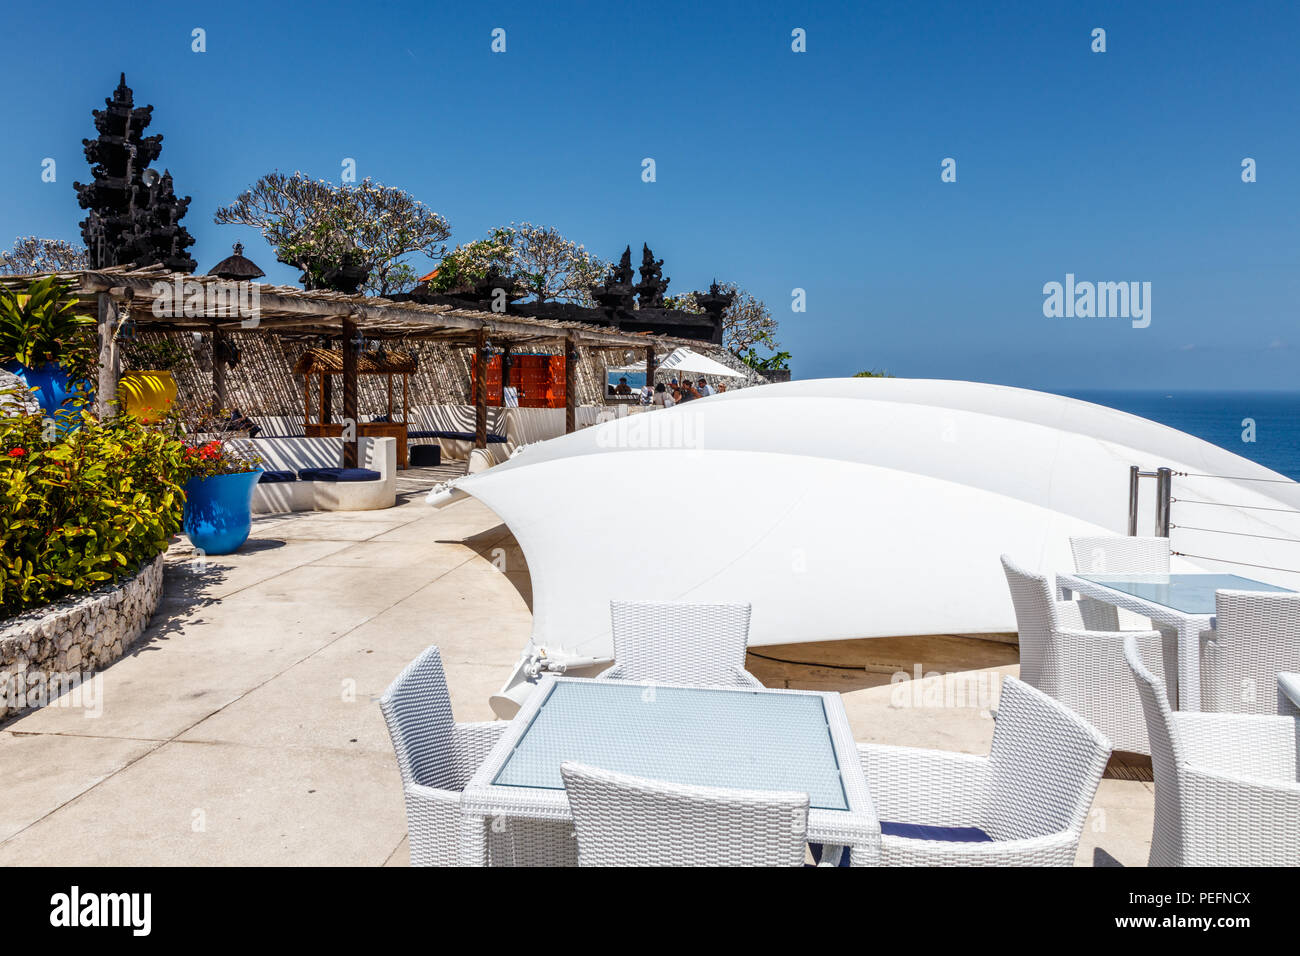 White tables and chairs at a outdoor cliff cafe with ocean view, Ungasan, Bali, Indonesia. Stock Photo